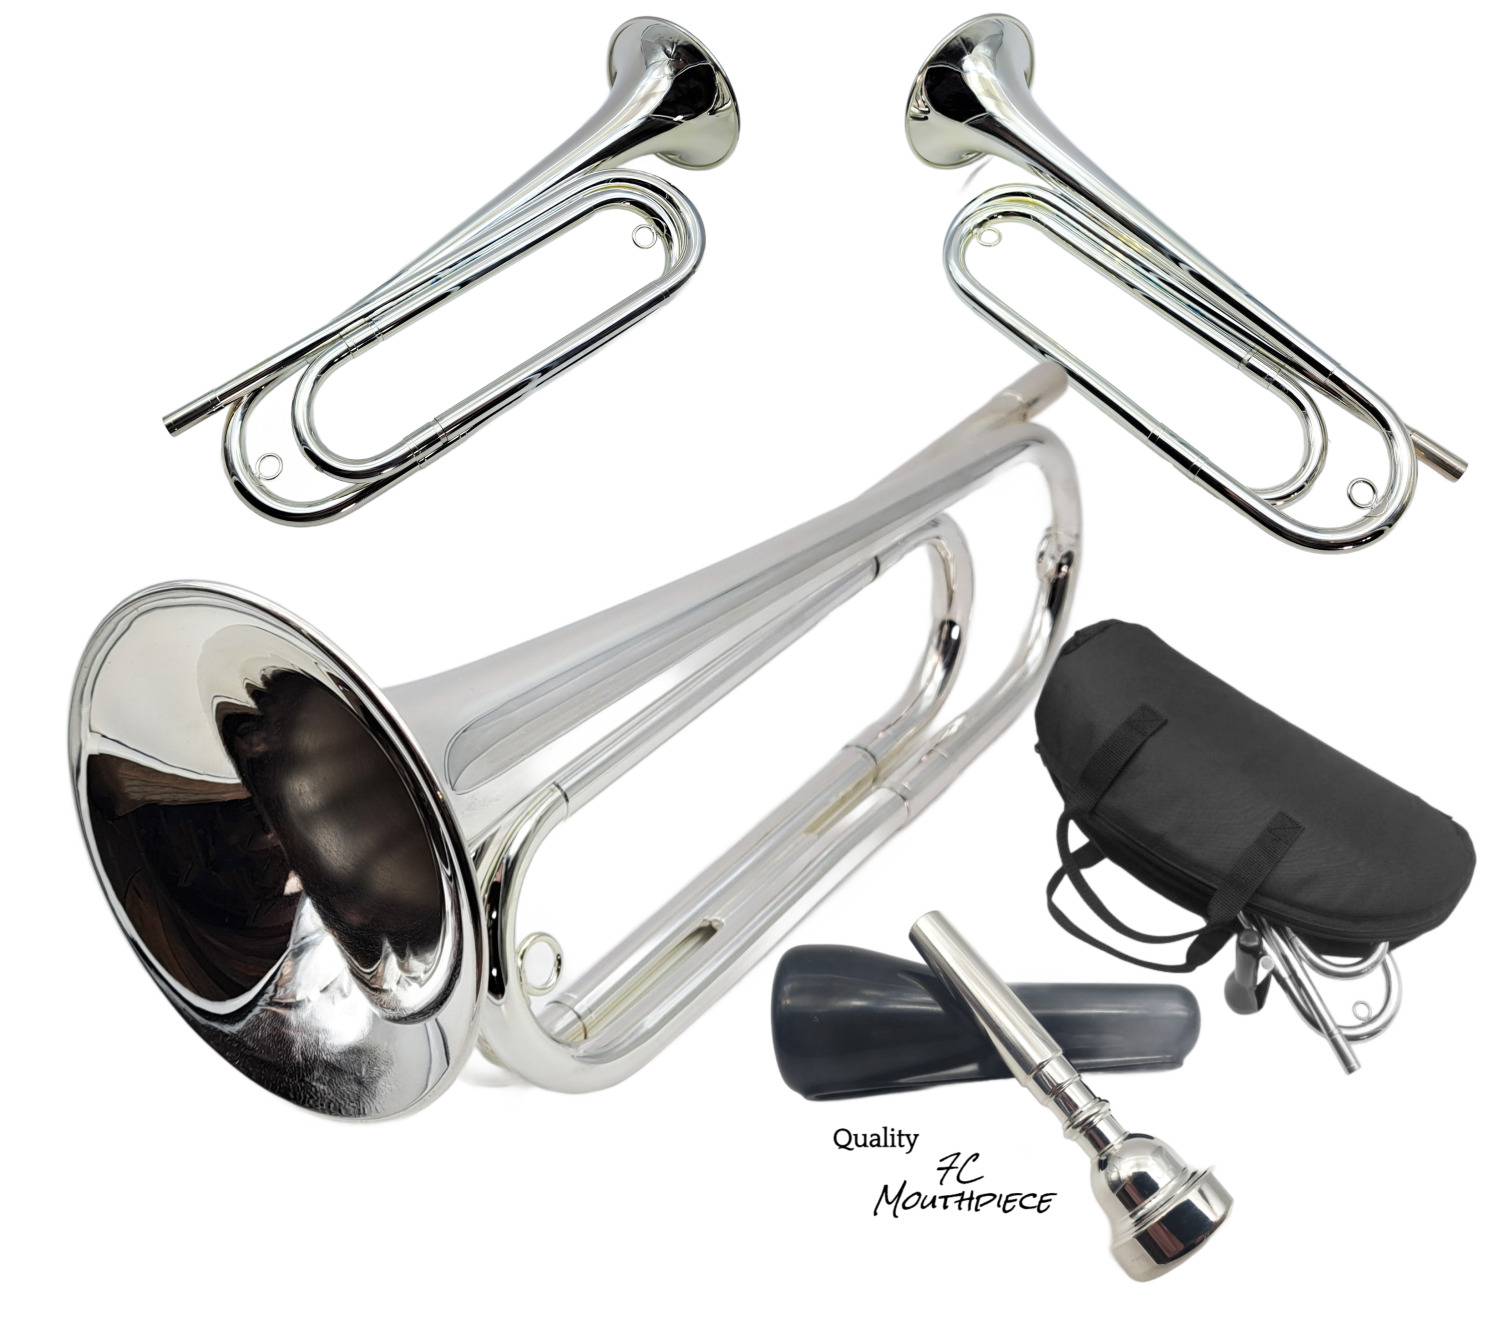 Regiment Bugle-SILVER-Key of G/F-Padded Case-Quality 7C Silver Plated Mouthpiece